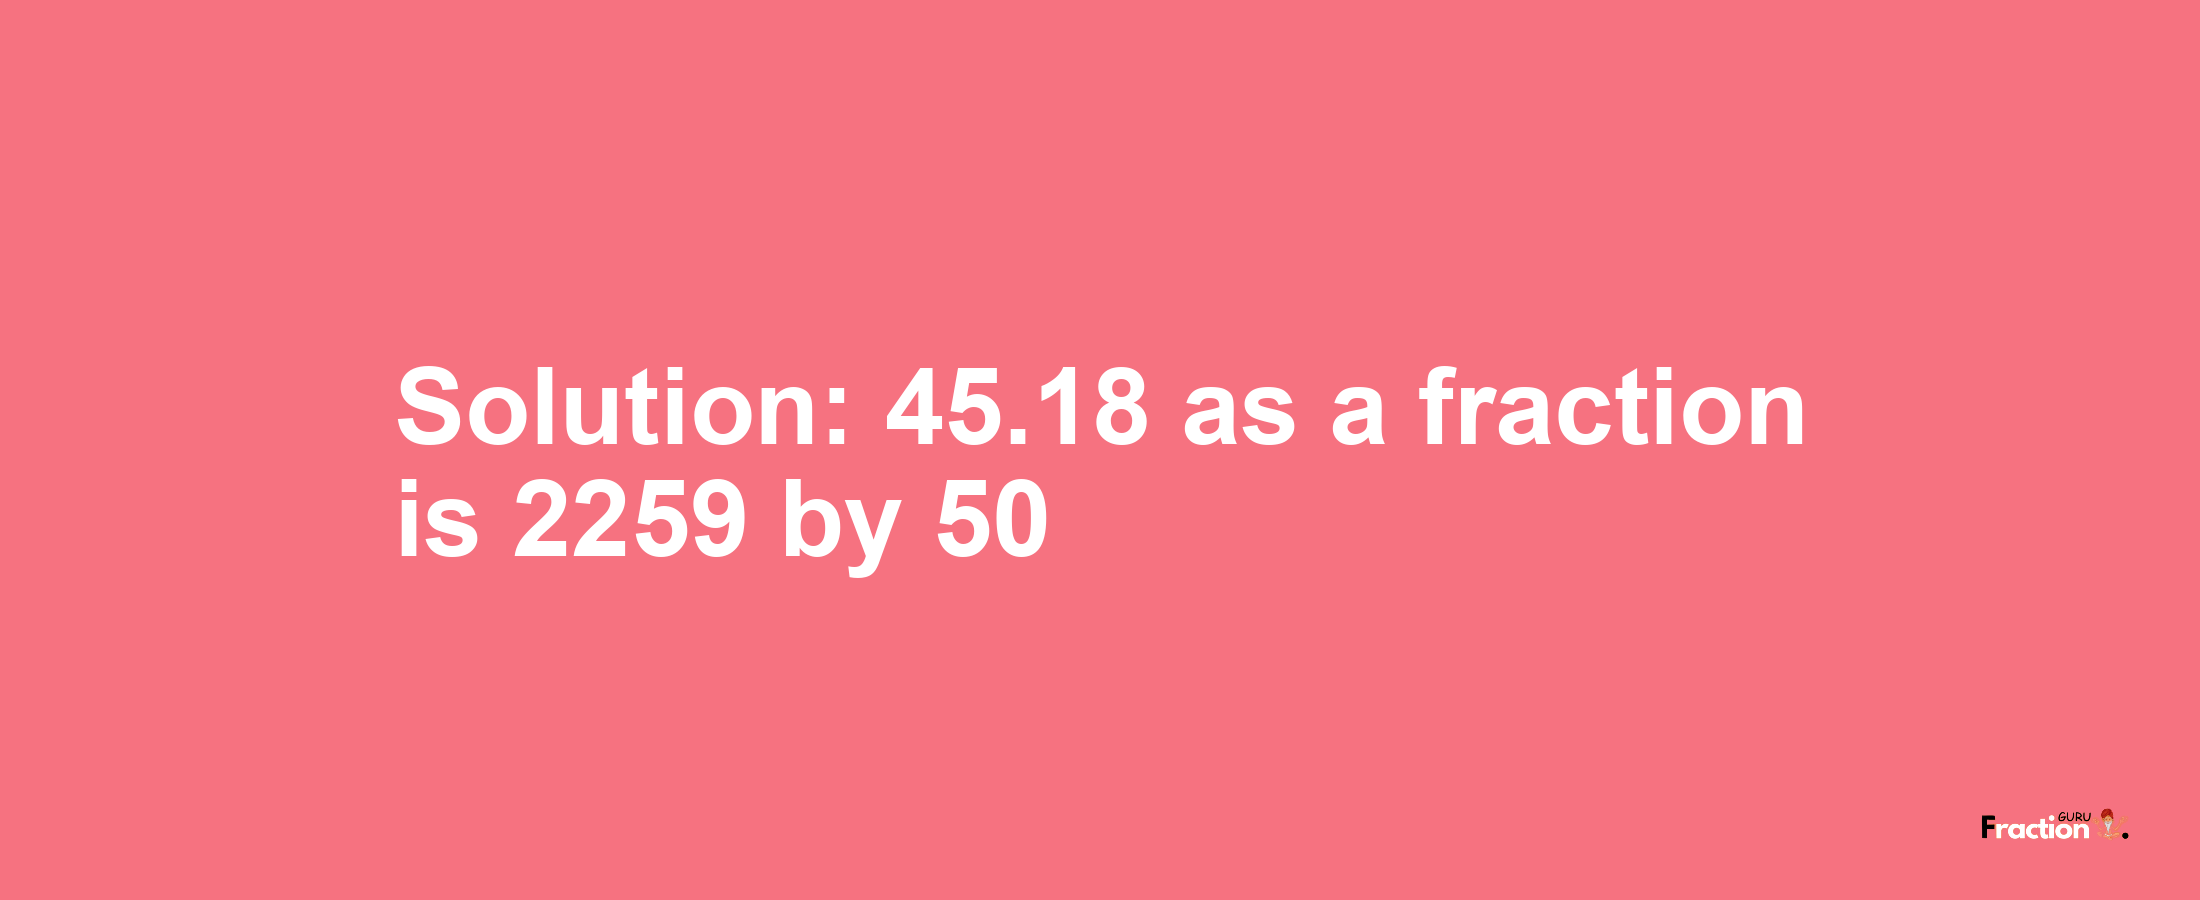 Solution:45.18 as a fraction is 2259/50